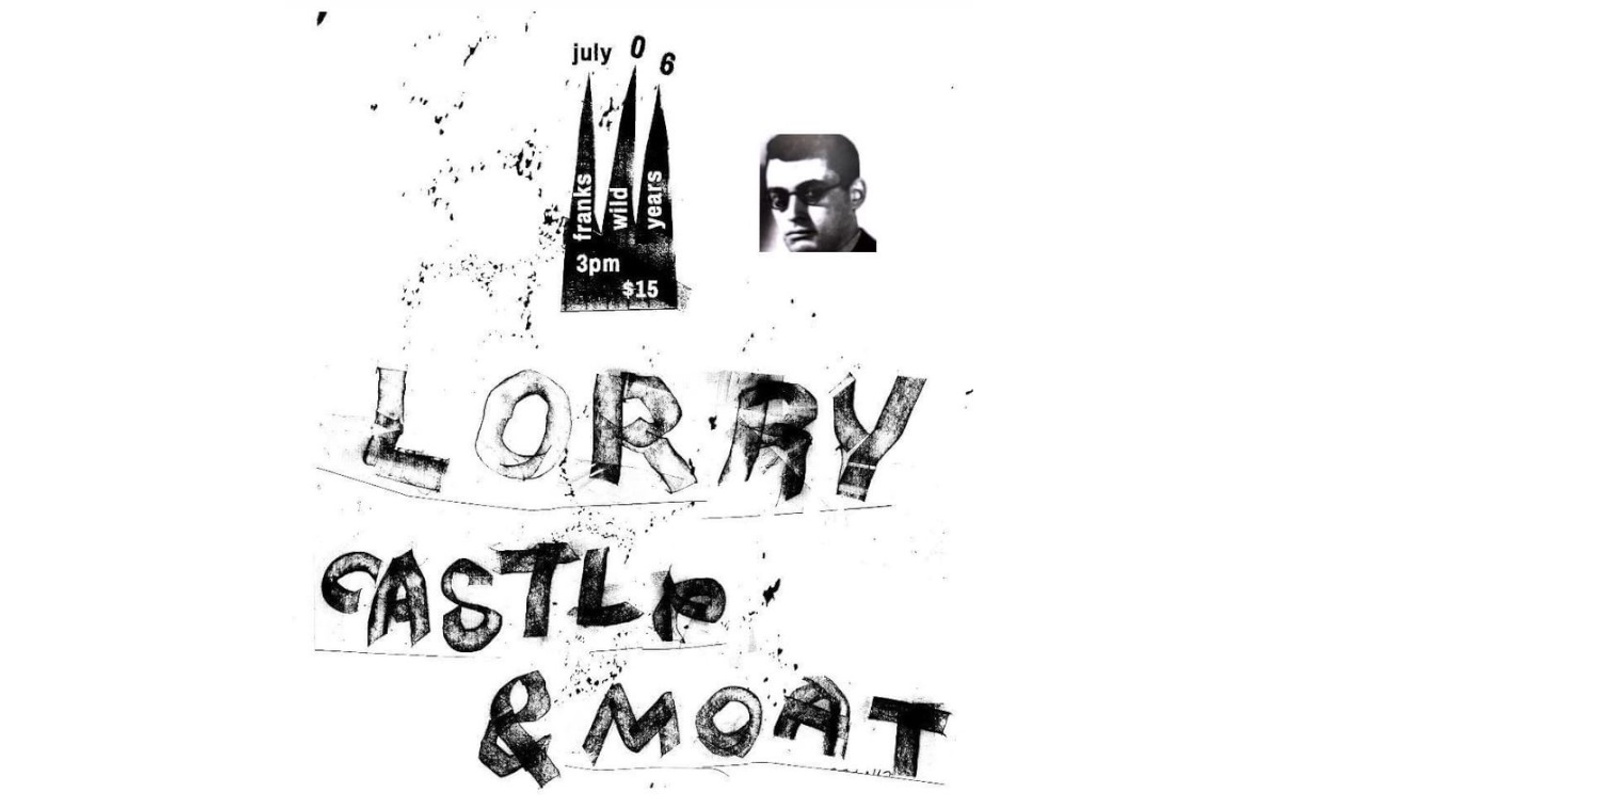 Banner image for Lorry + Castle & Moat